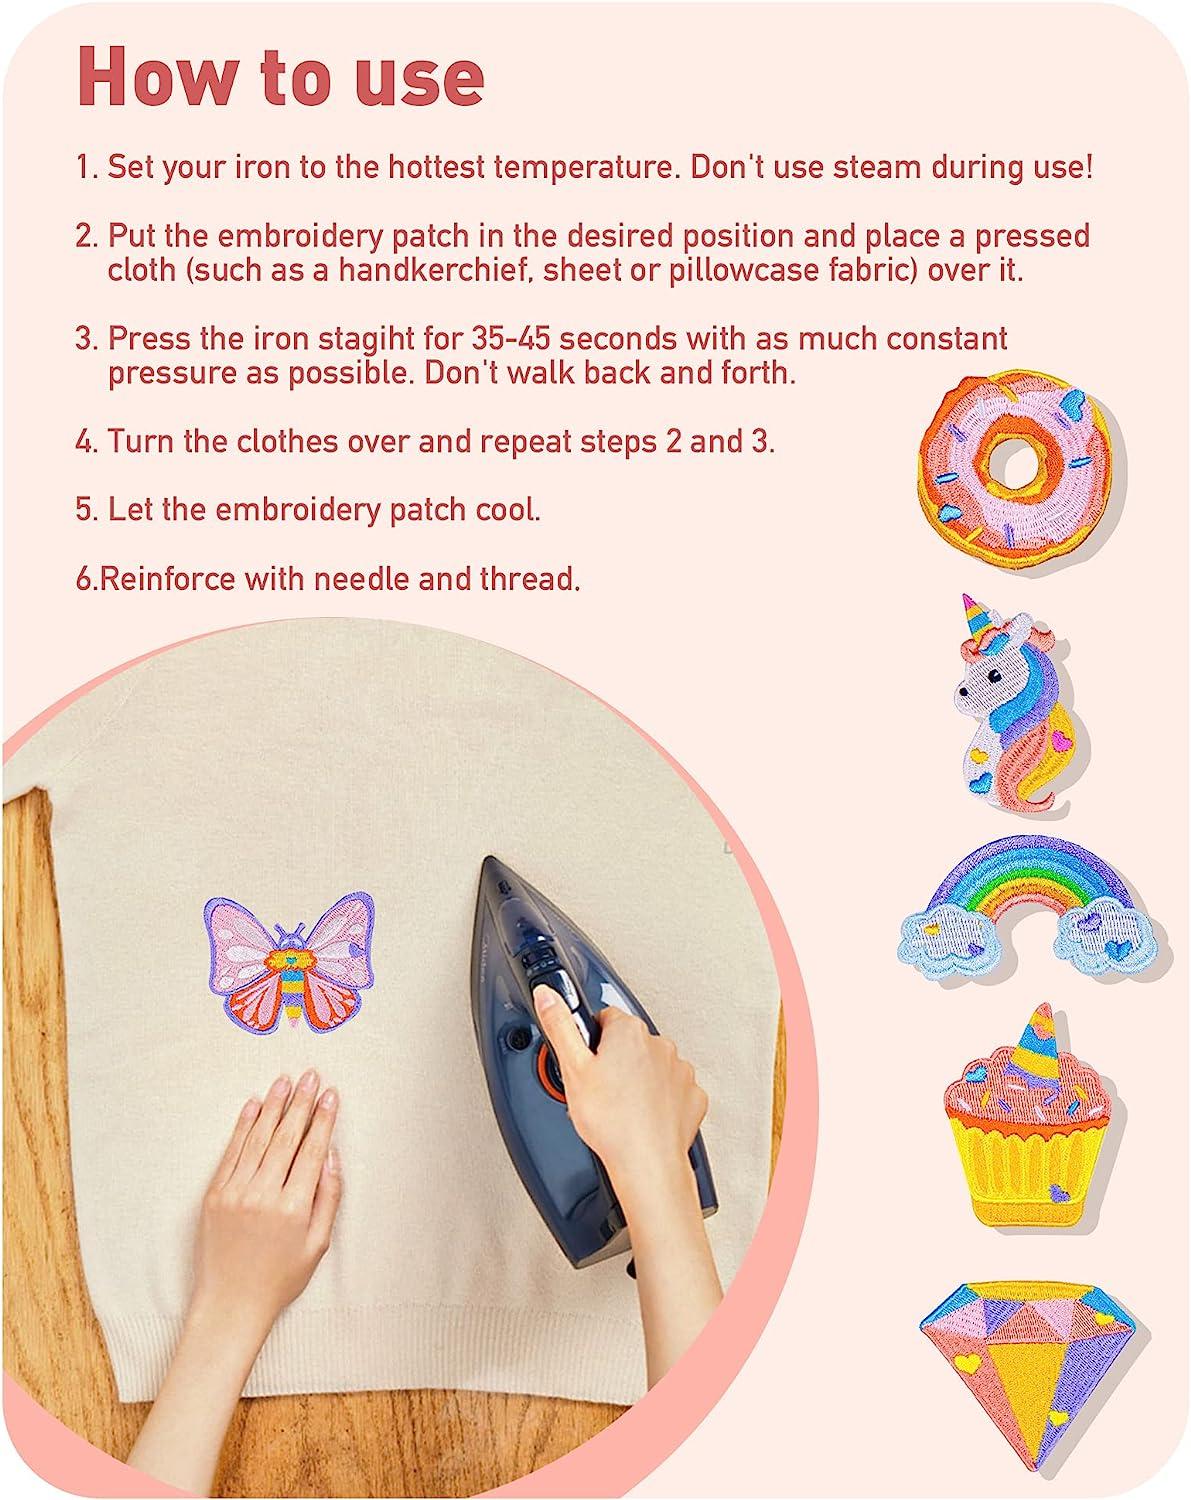 How to Iron on Patches In 4 Simple Steps